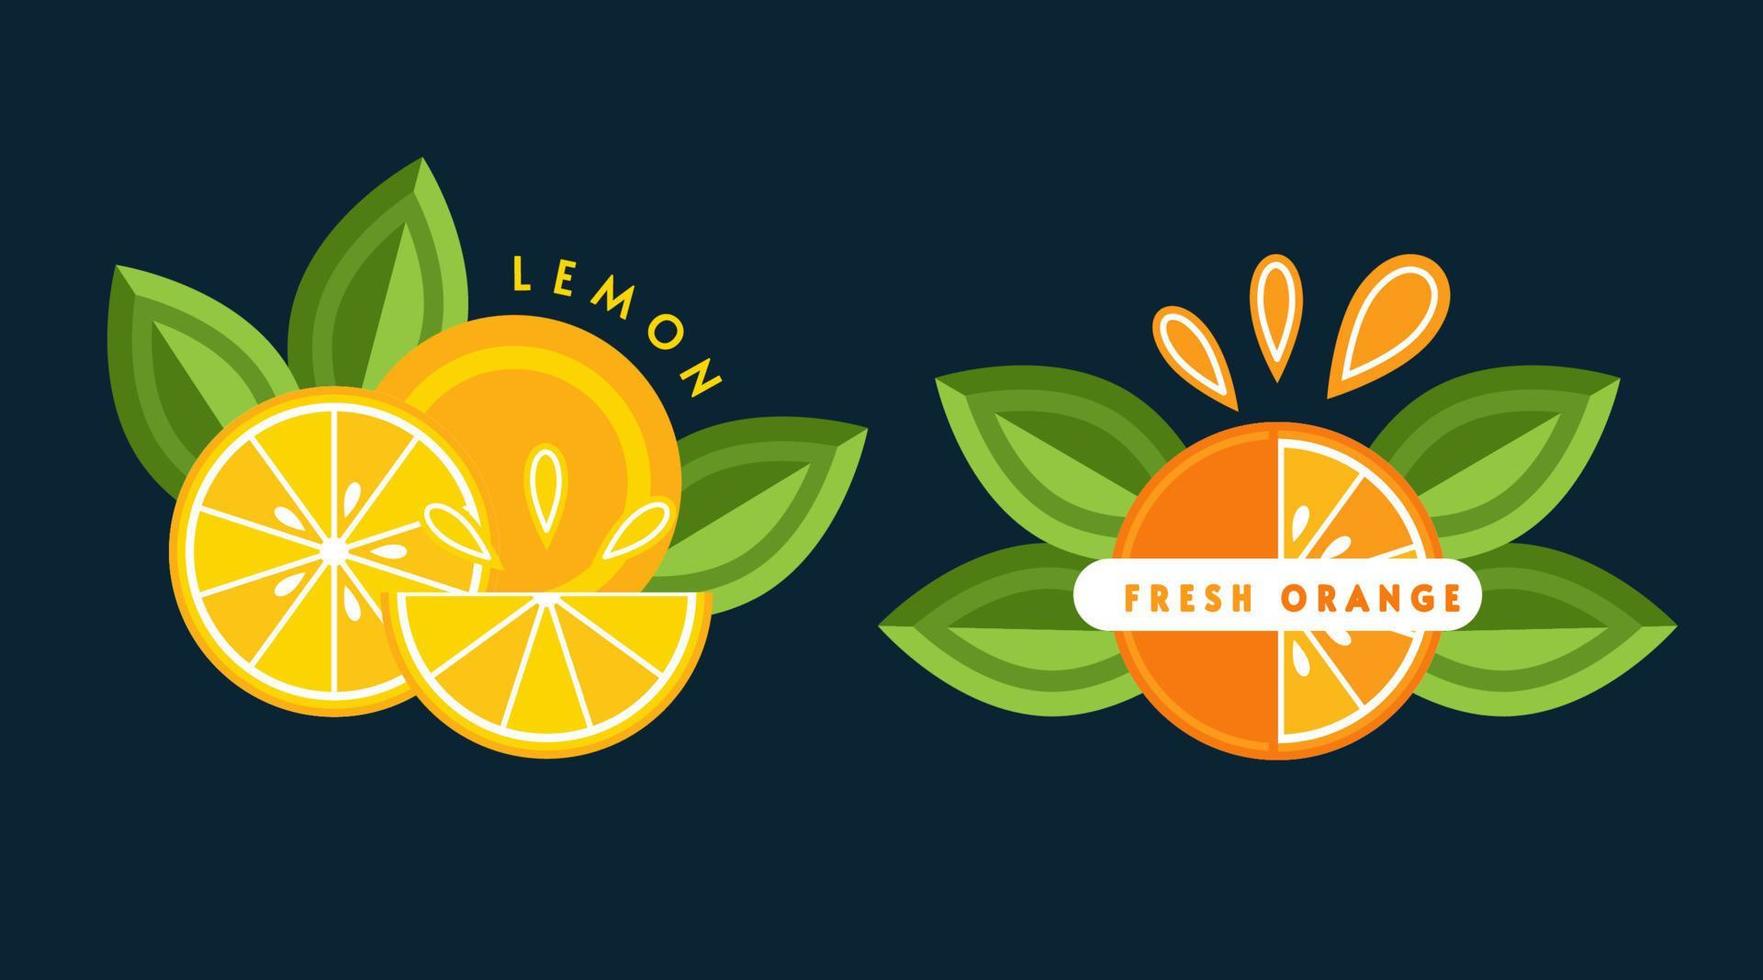 Set of emblems, badges with orange, lemon, green leaves, fruit slices. Good for decoration of food packaging, groceries, agriculture stores, advertising. Flat style vector